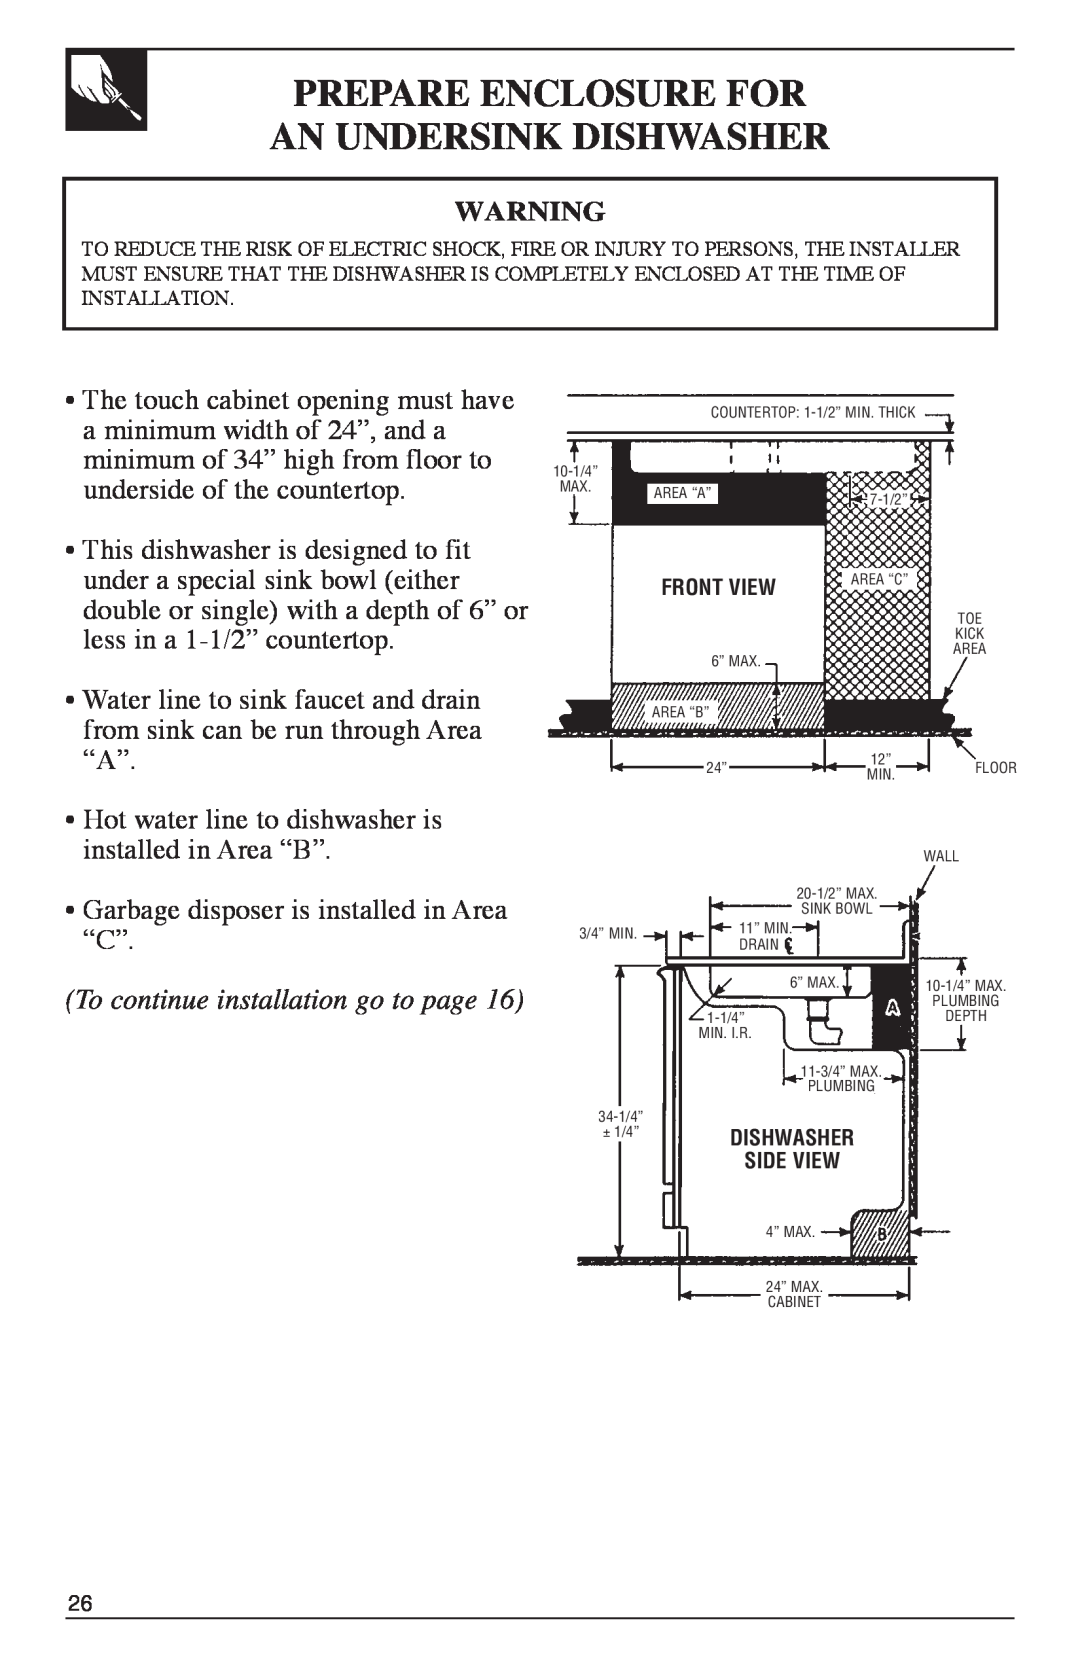 GE 500A200P047 installation instructions Prepare Enclosure For An Undersink Dishwasher, To continue installation go to page 